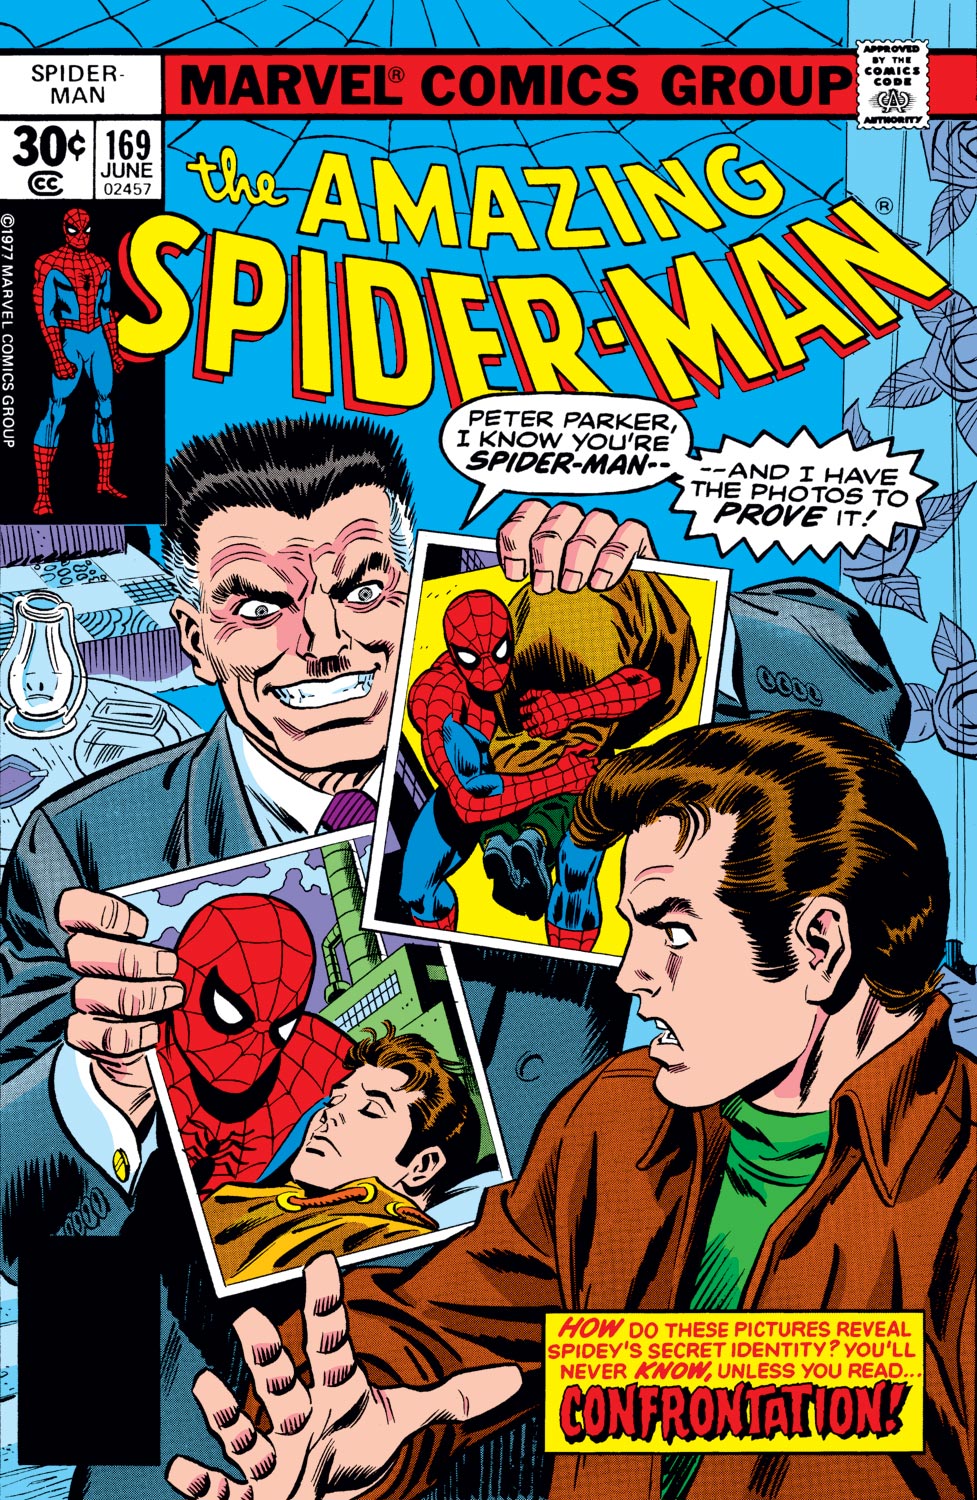 The Amazing Spider-Man (1963) #169 | Comic Issues | Marvel